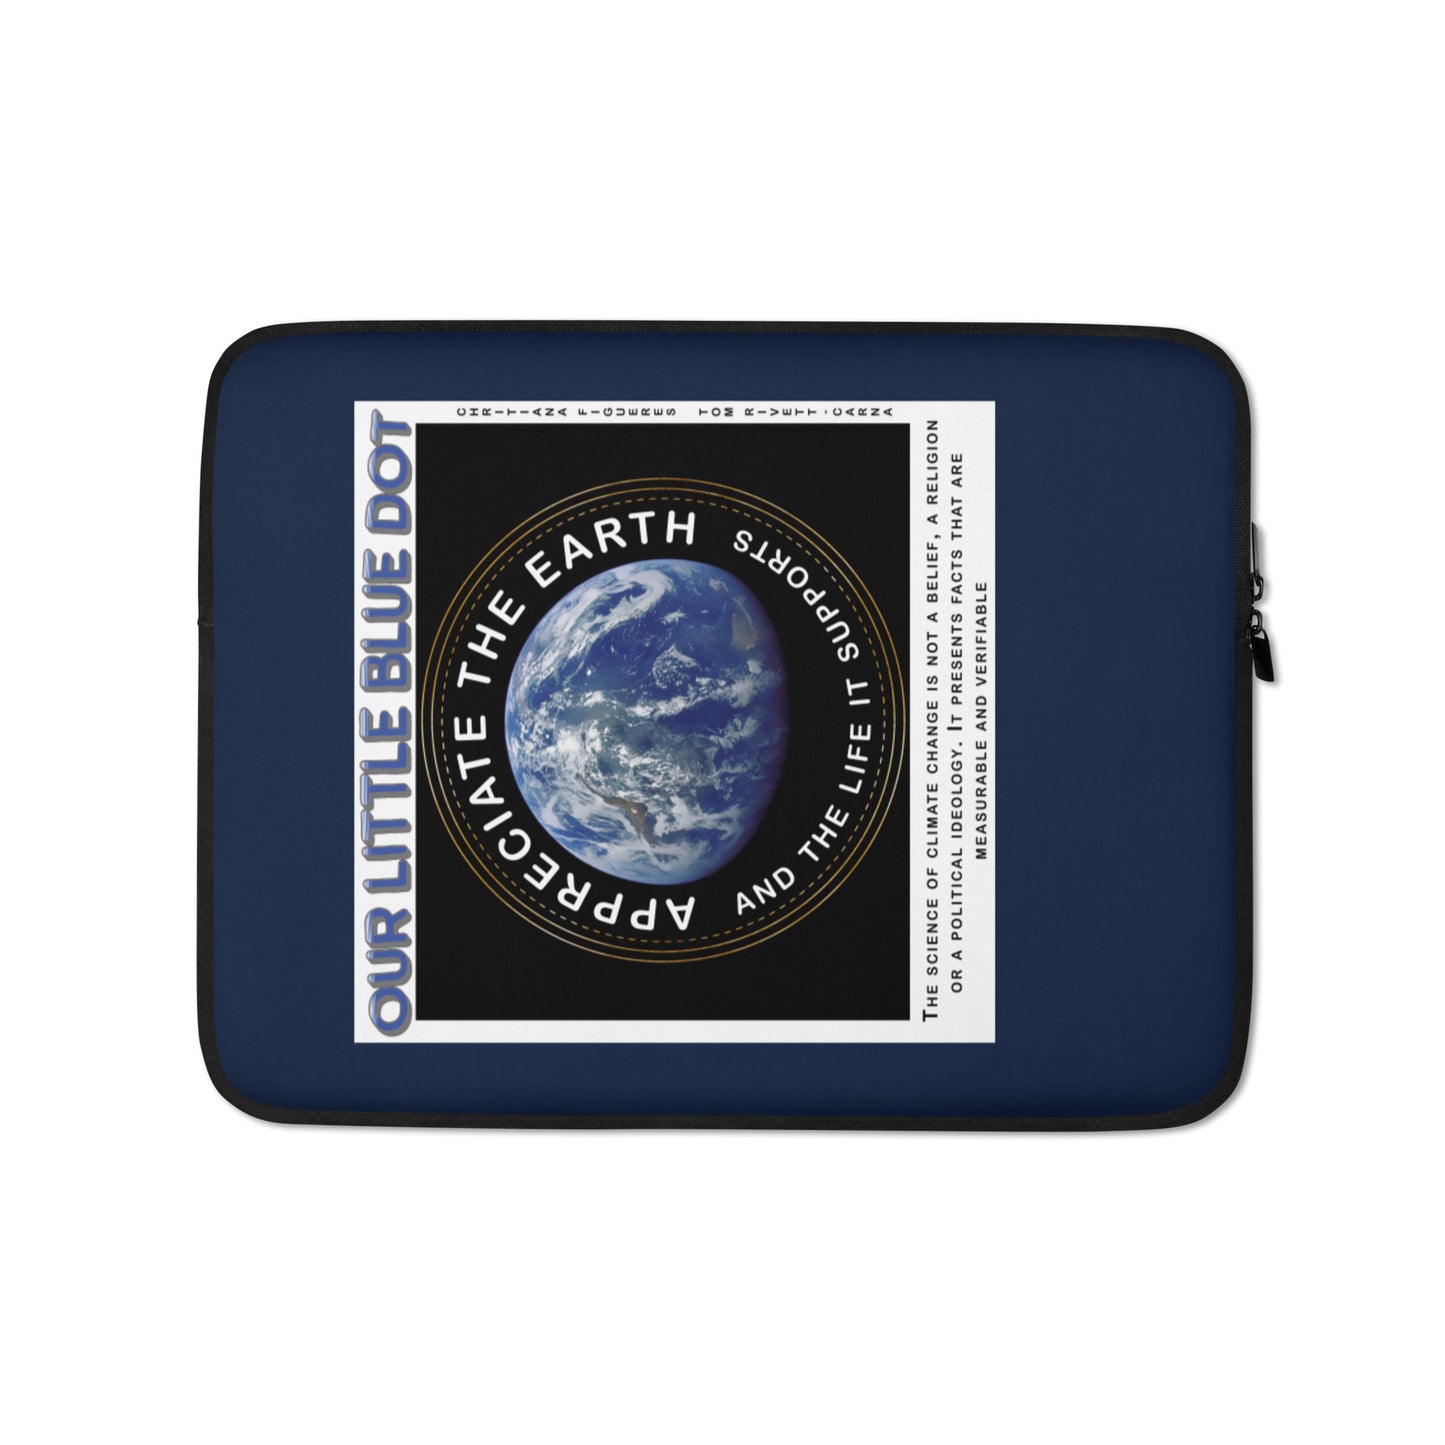 Laptop Sleeve - Appreciate The Earth, Christiana Figueres